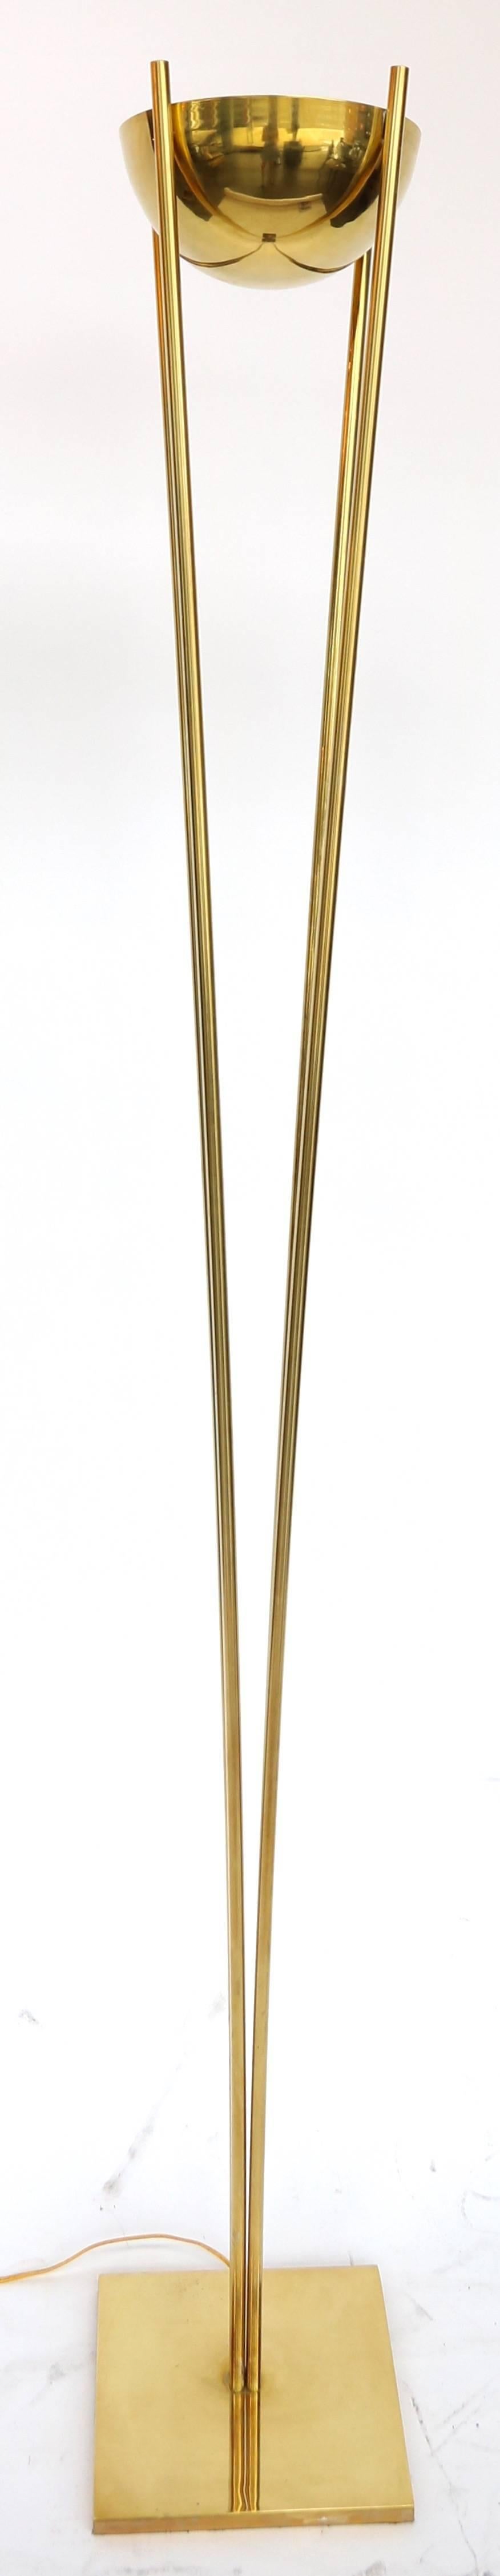 Mid-Century Modern Pair of 1970s Brass Torchères Floor Lamps For Sale